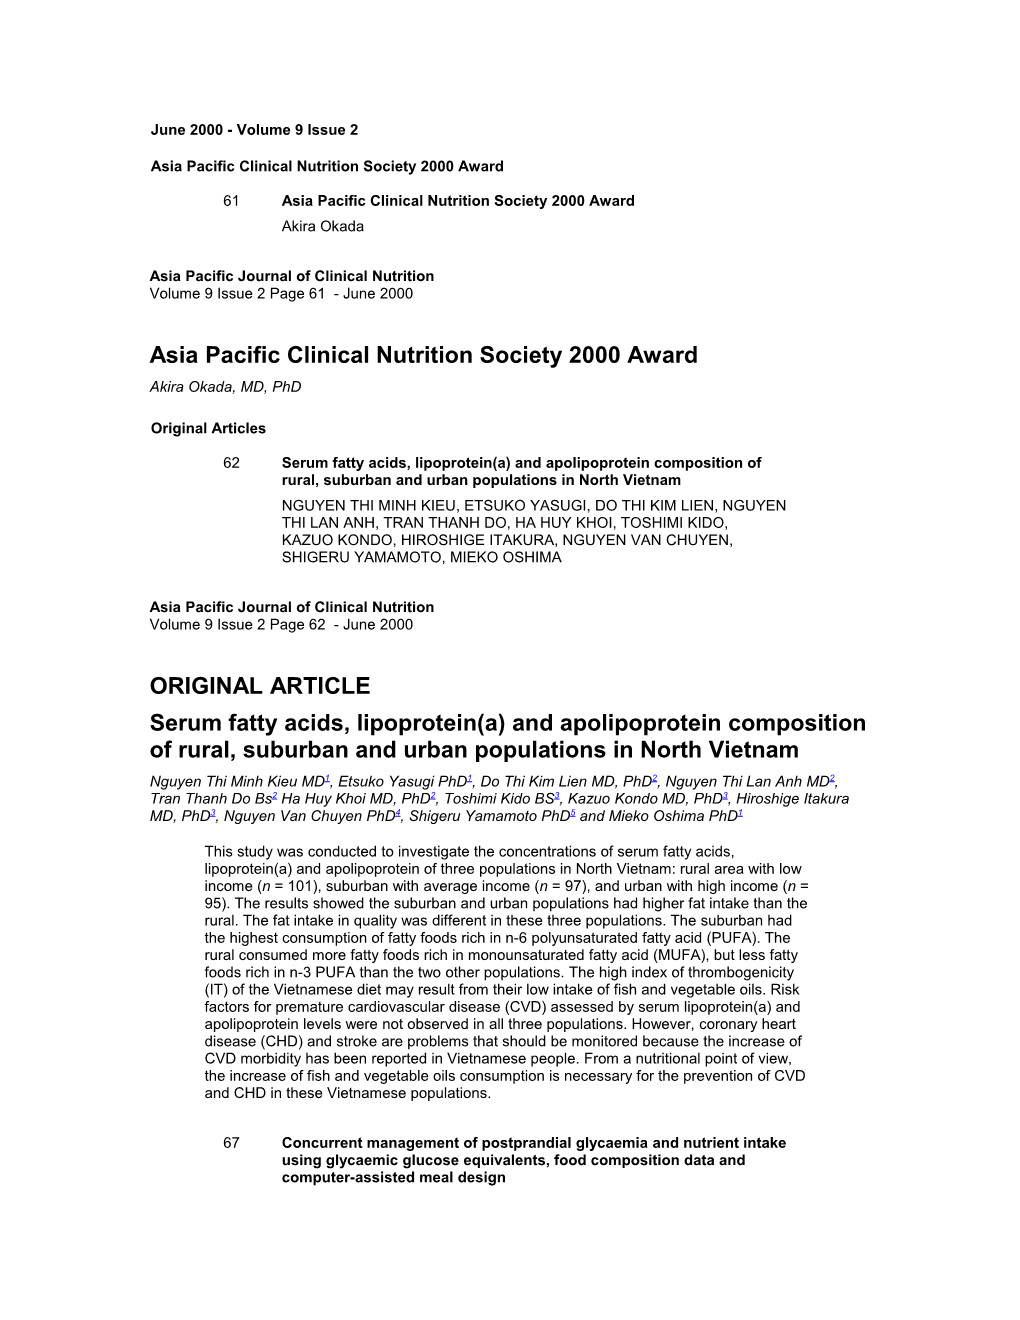 Asia Pacific Clinical Nutrition Society 2000 Award